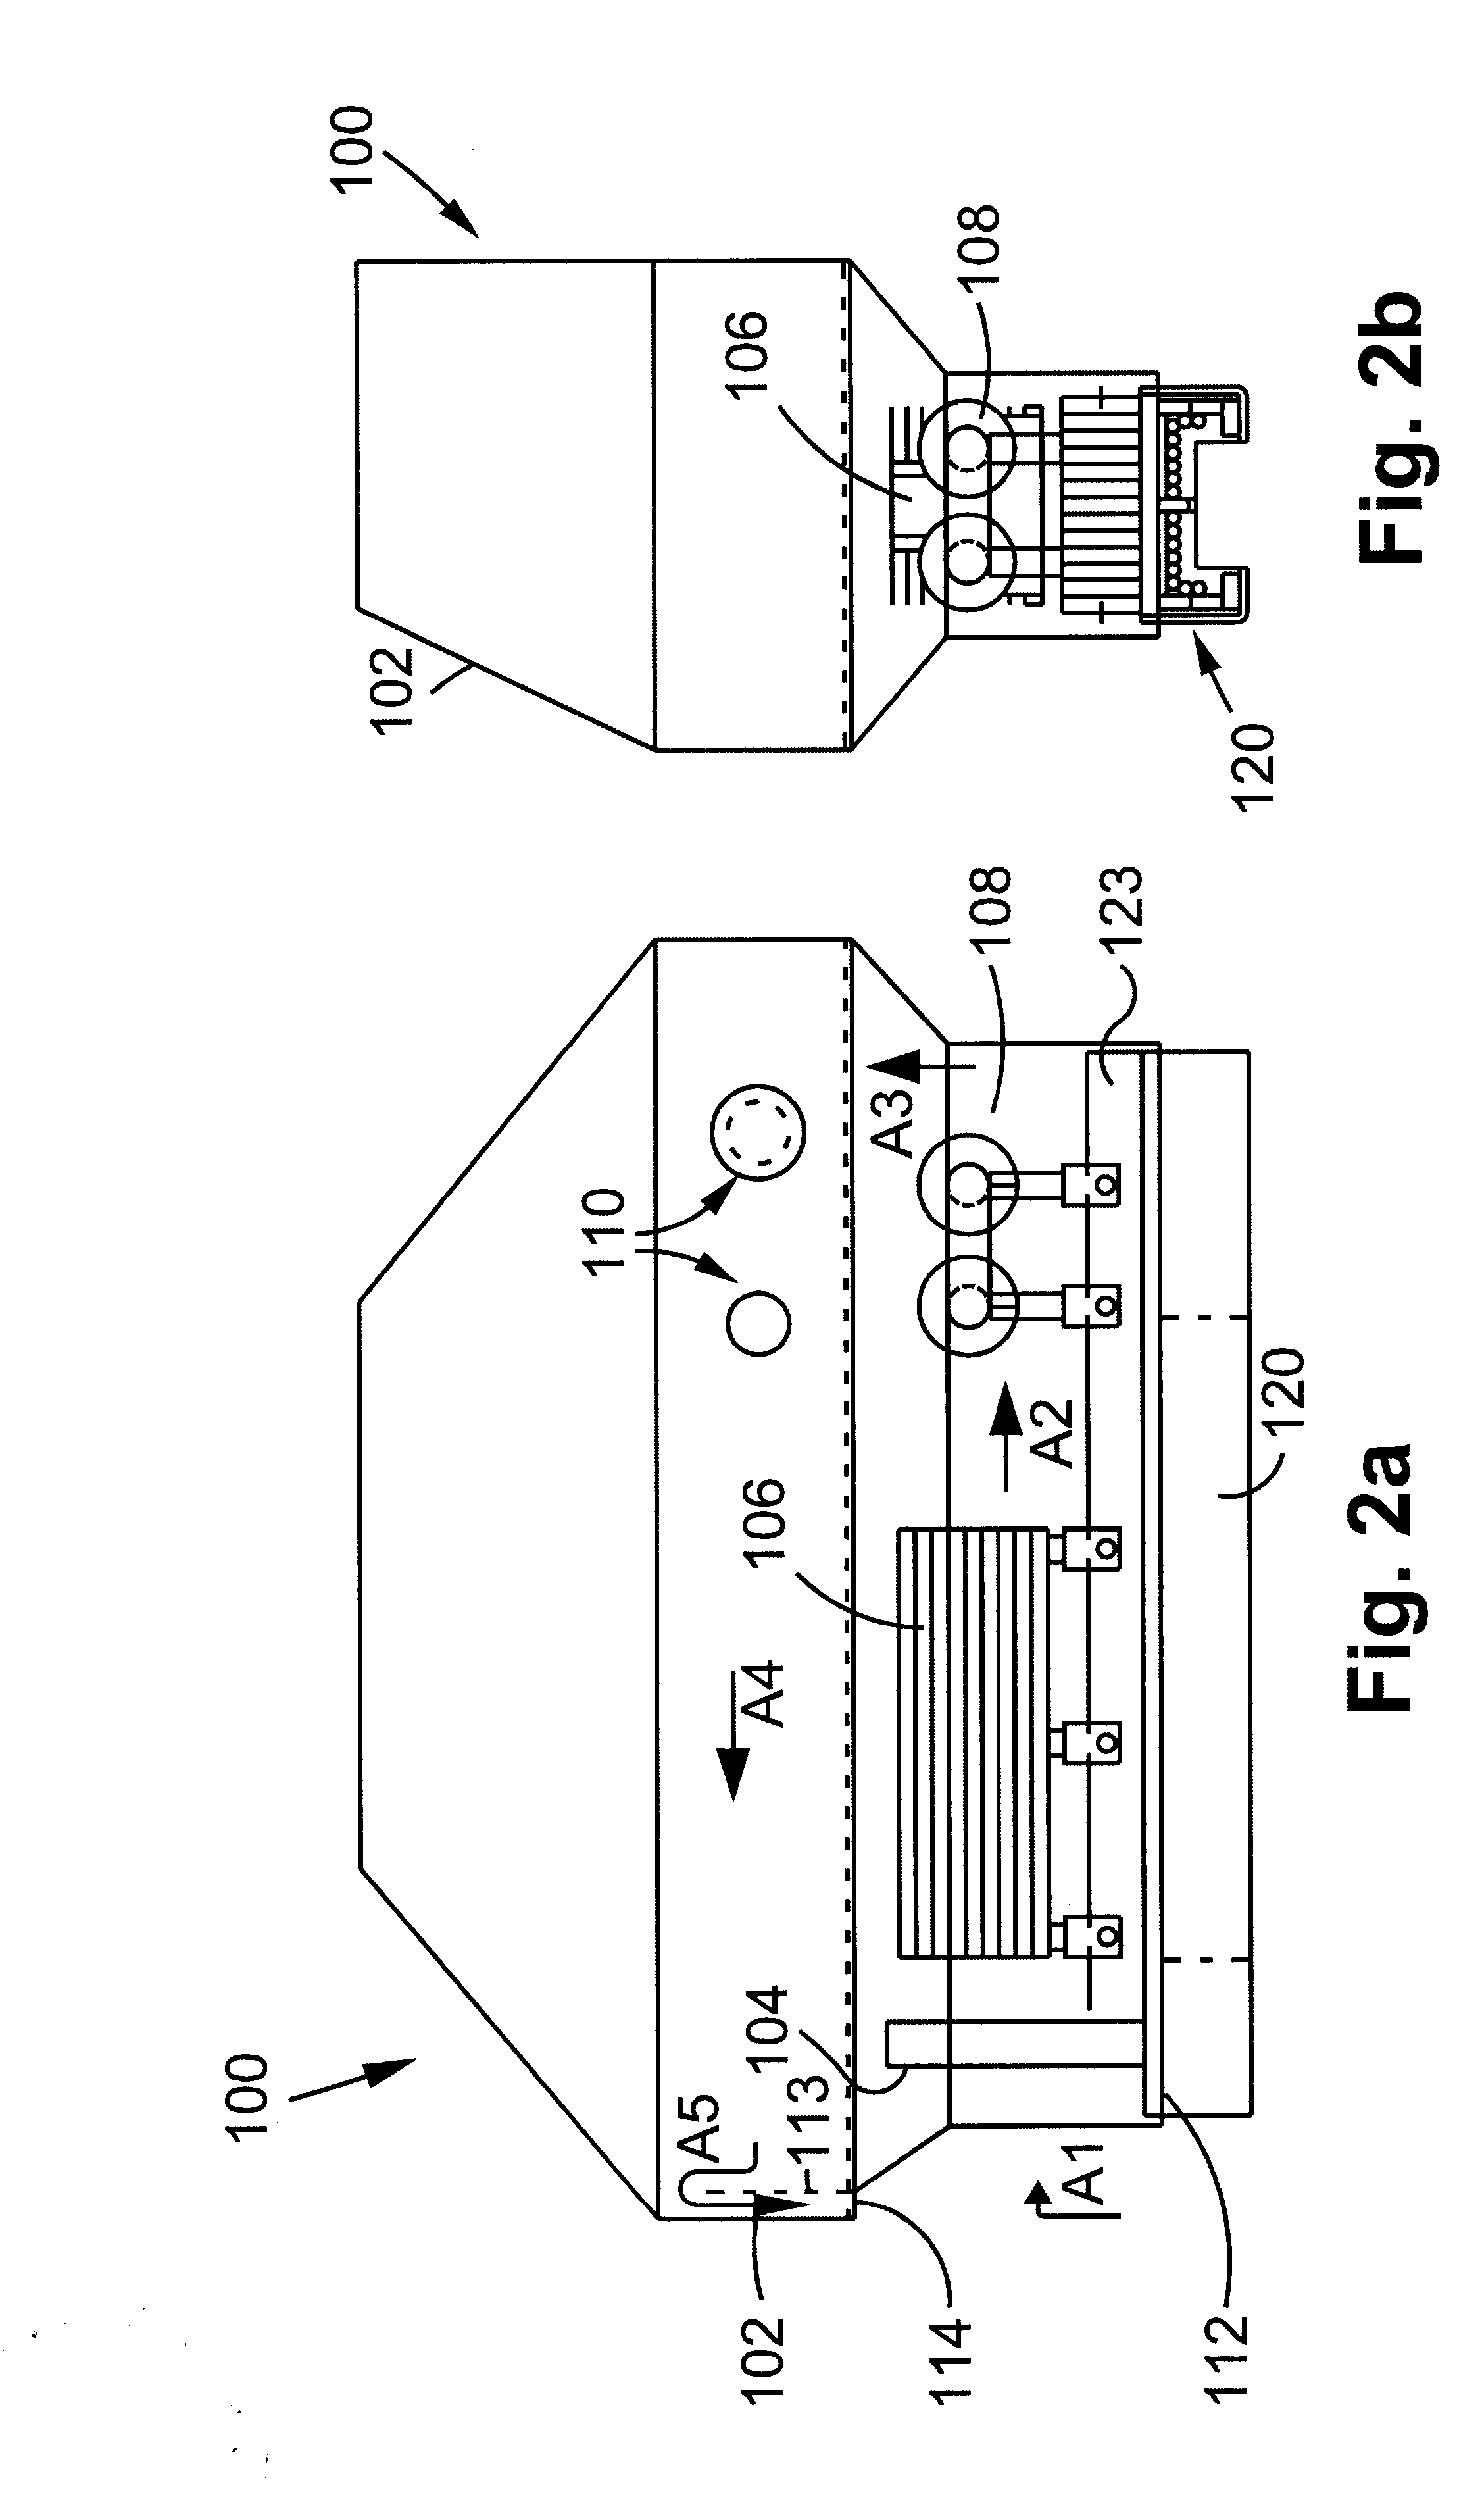 Slotted induction heater